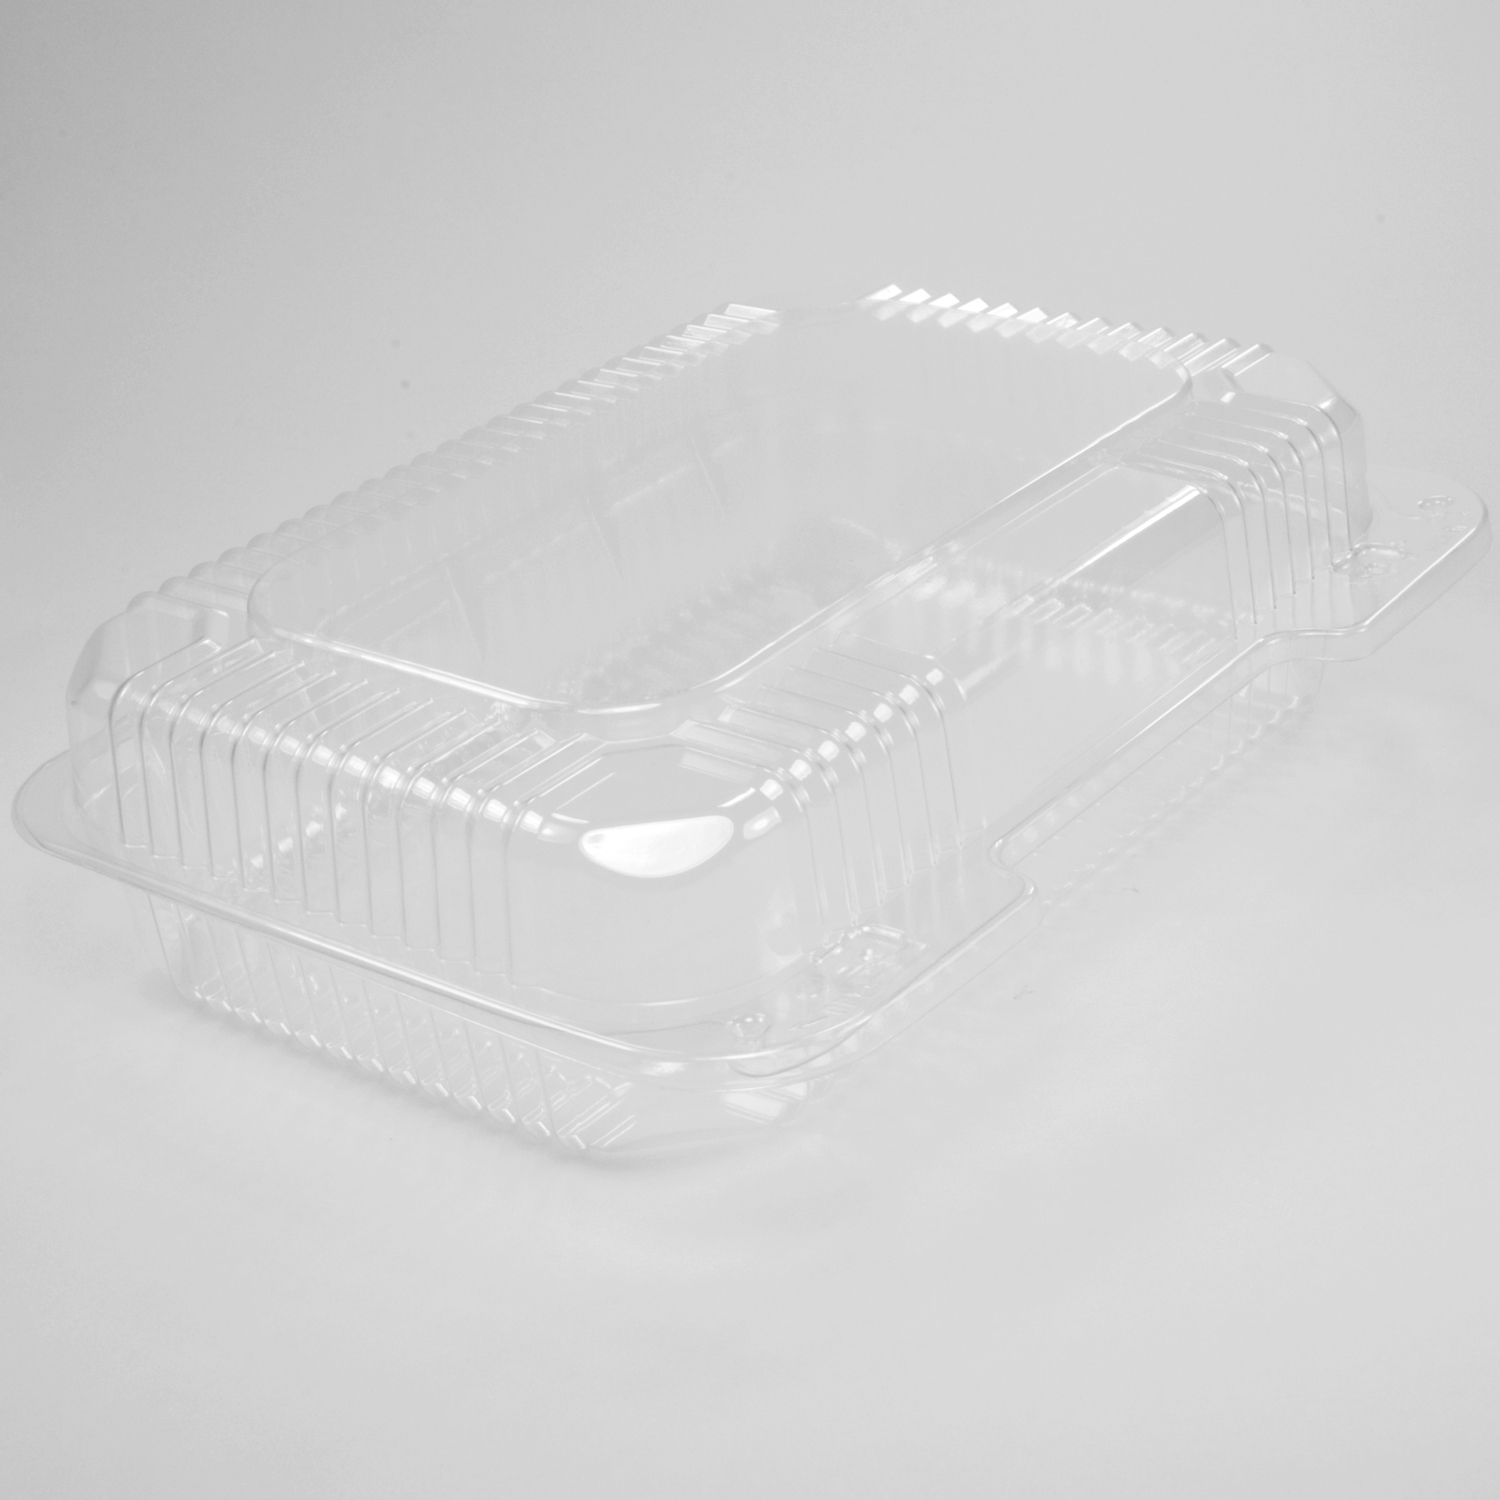 OBLONG CLEAR 1 COMPARTMENT CONTAINER 250